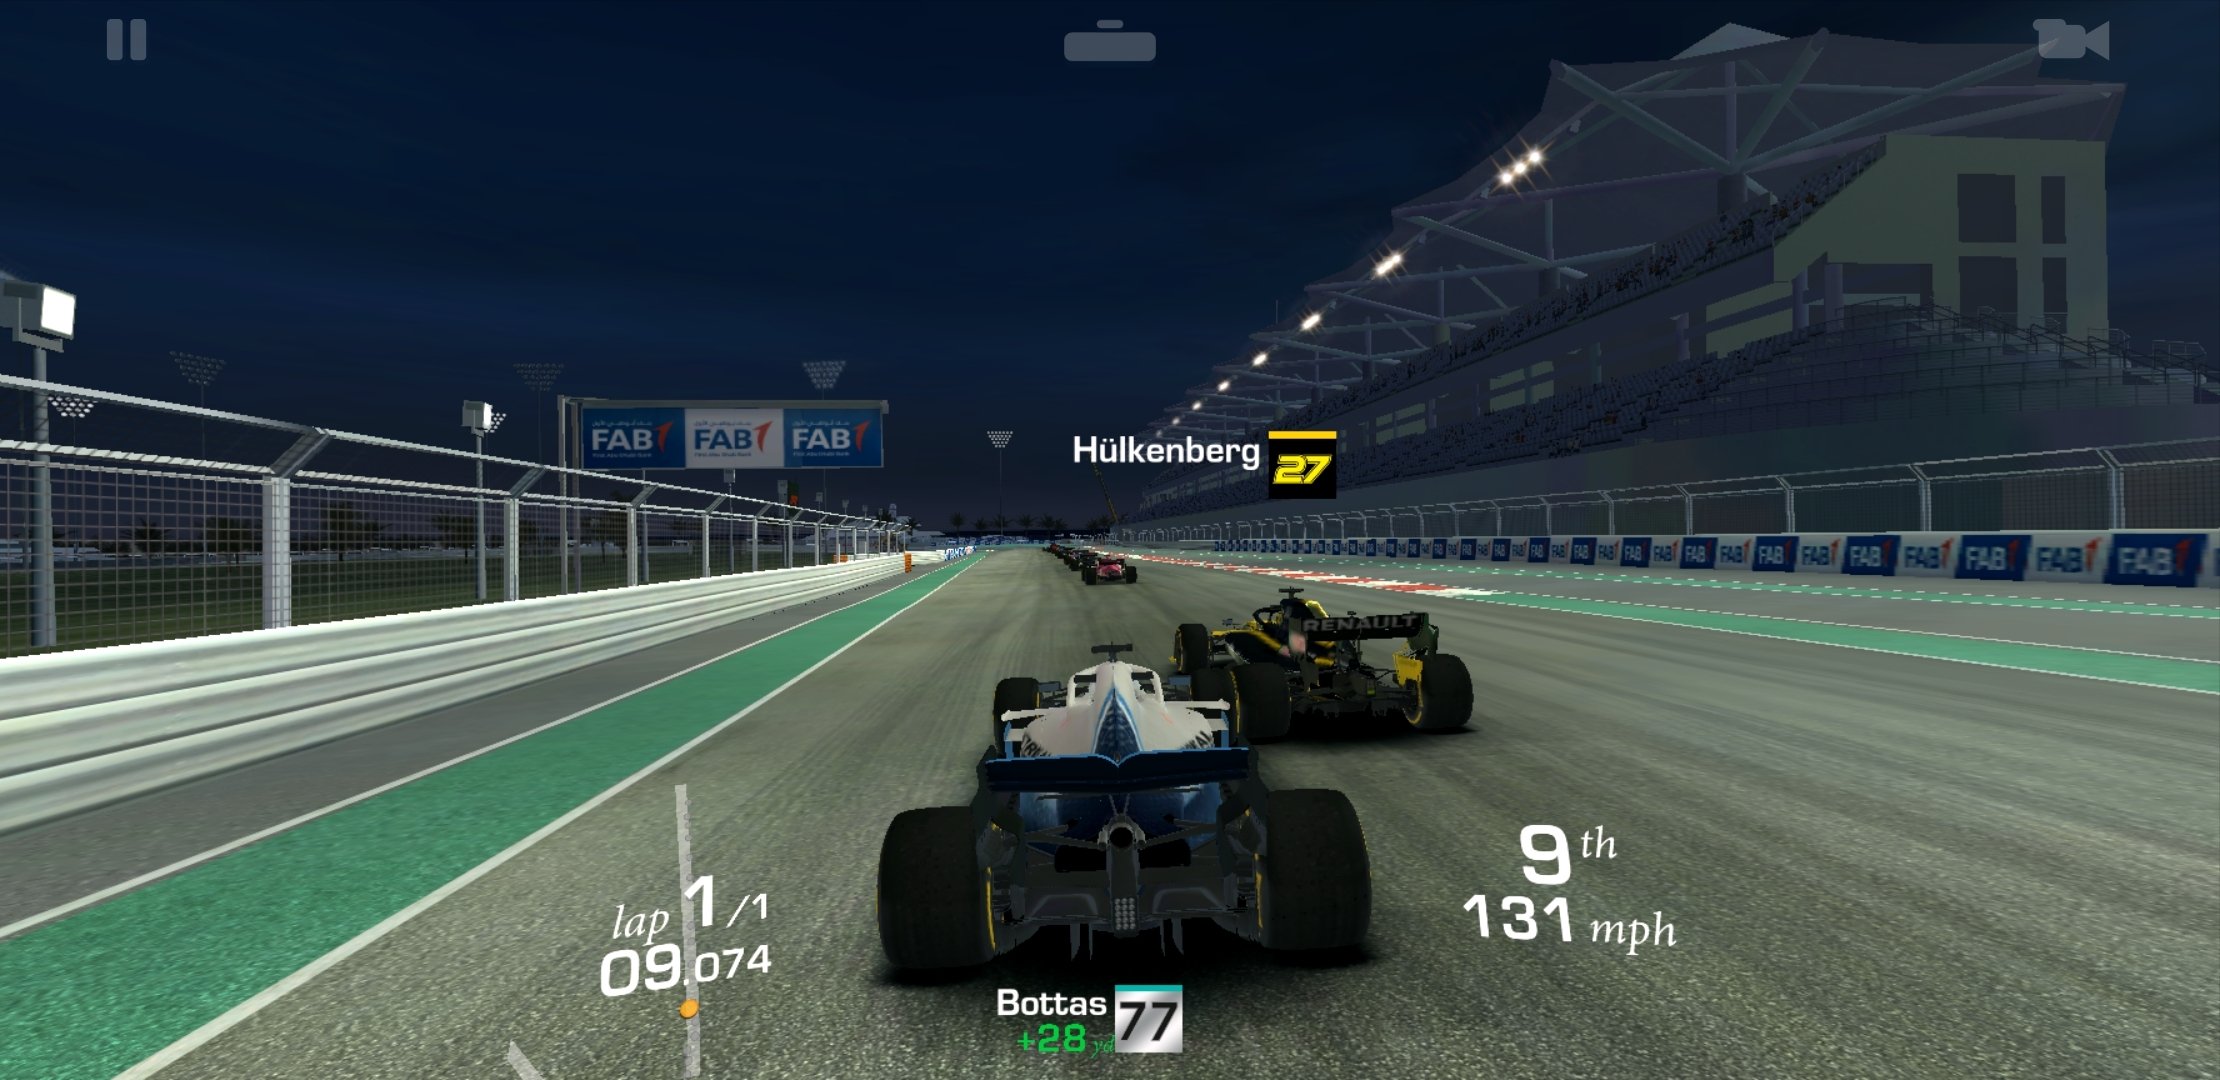 Real race 3 download